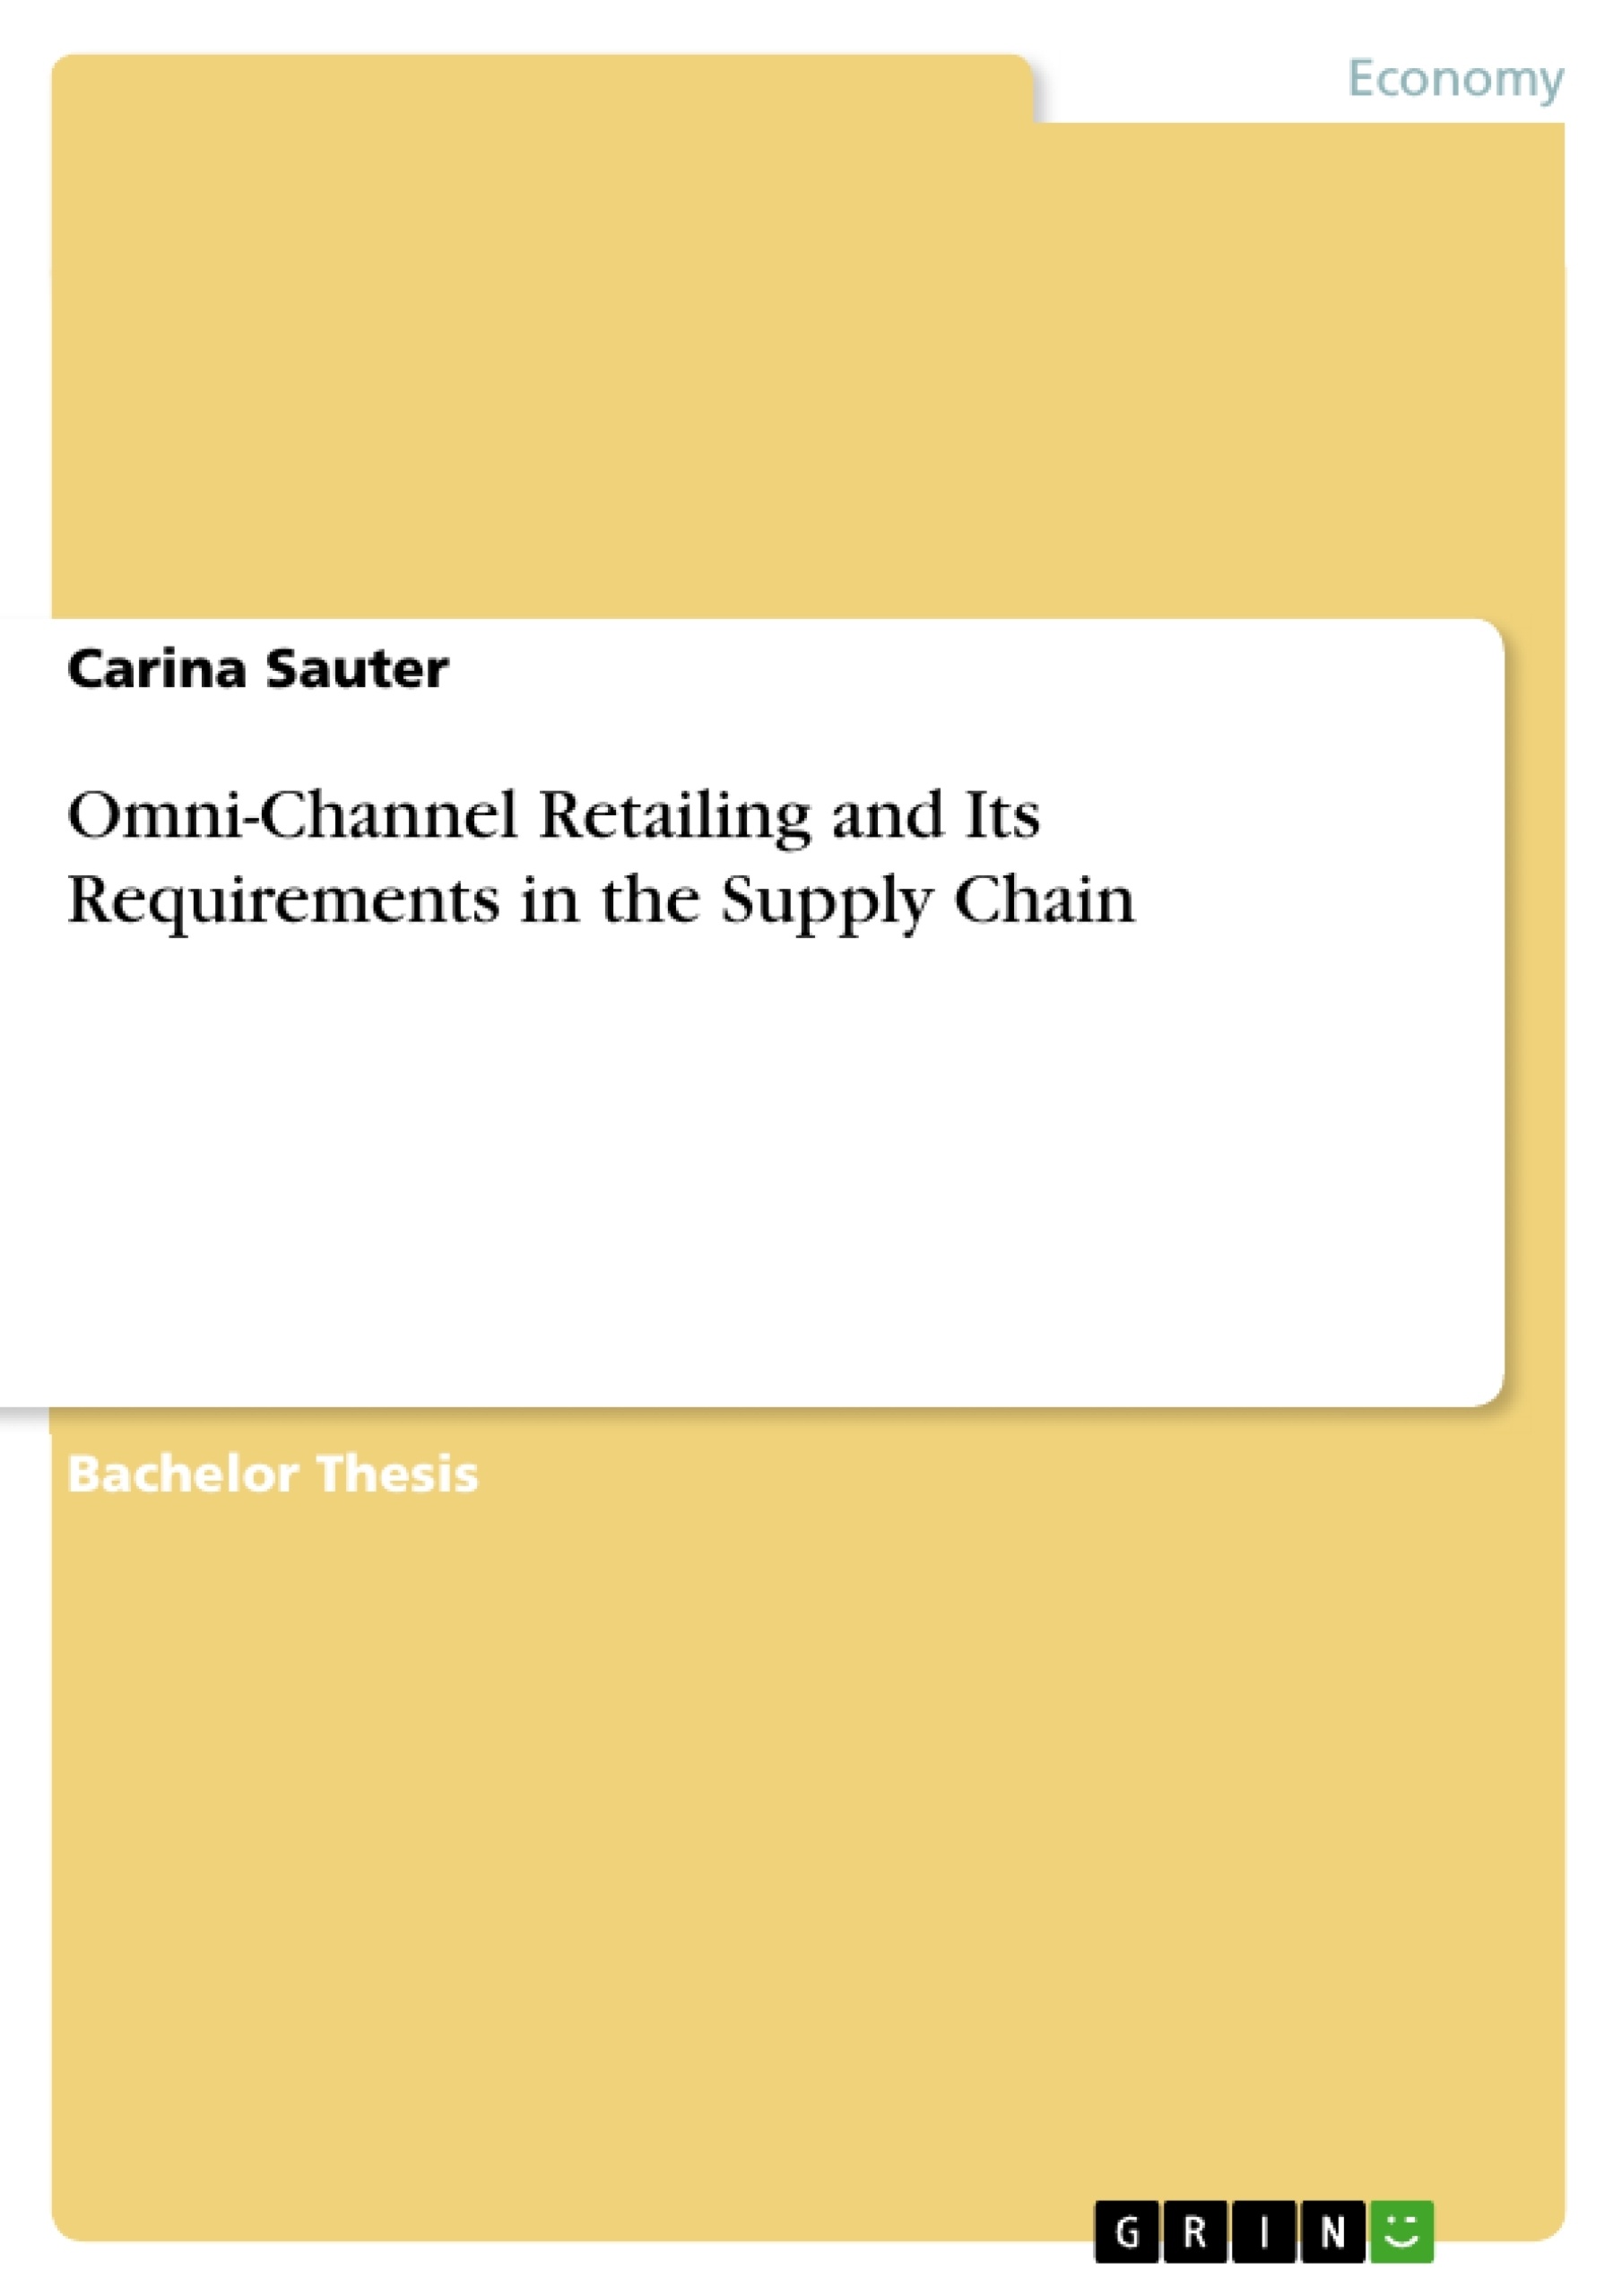 Thesis on supply chain integration